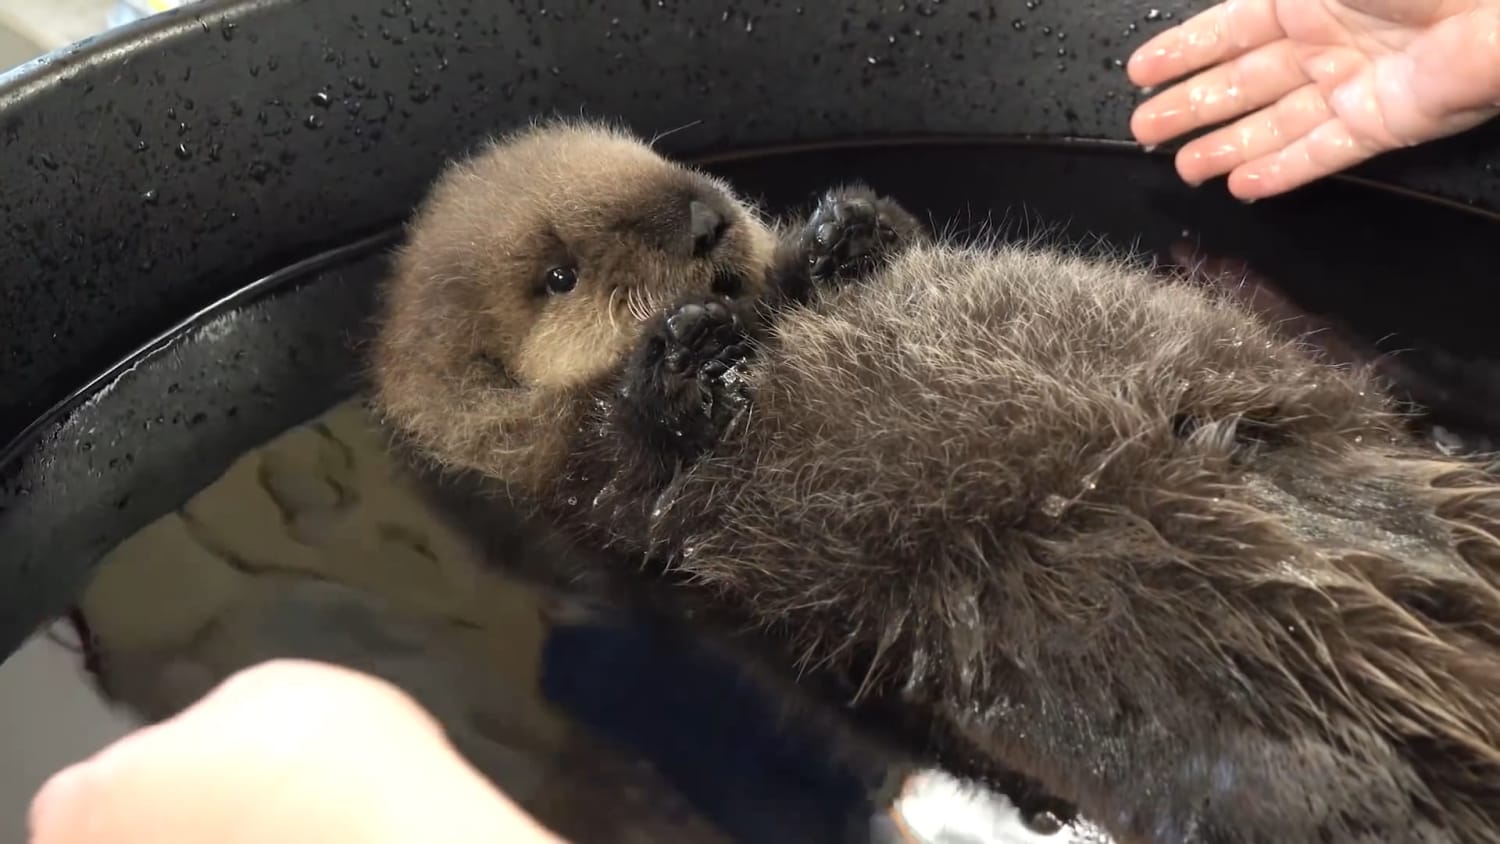 Baby otter testing water